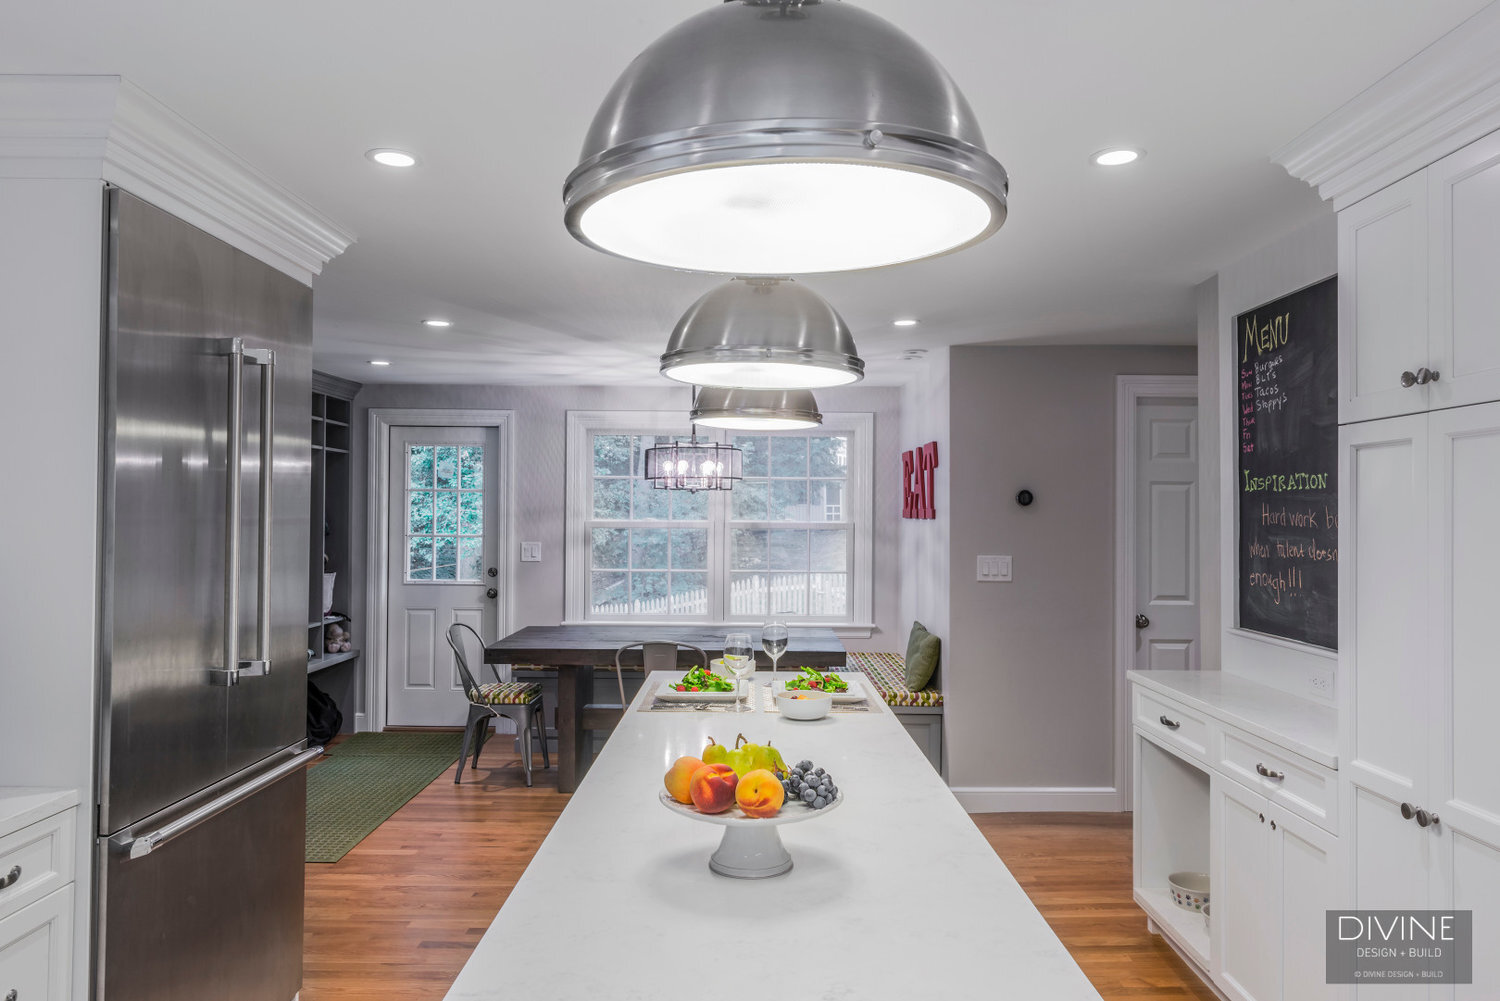  Grey and white transitional style kitchen with shaker cabinets and integrated dog feeding station. Chalkboard. Subway tile backsplash and industrial style lights and shelving